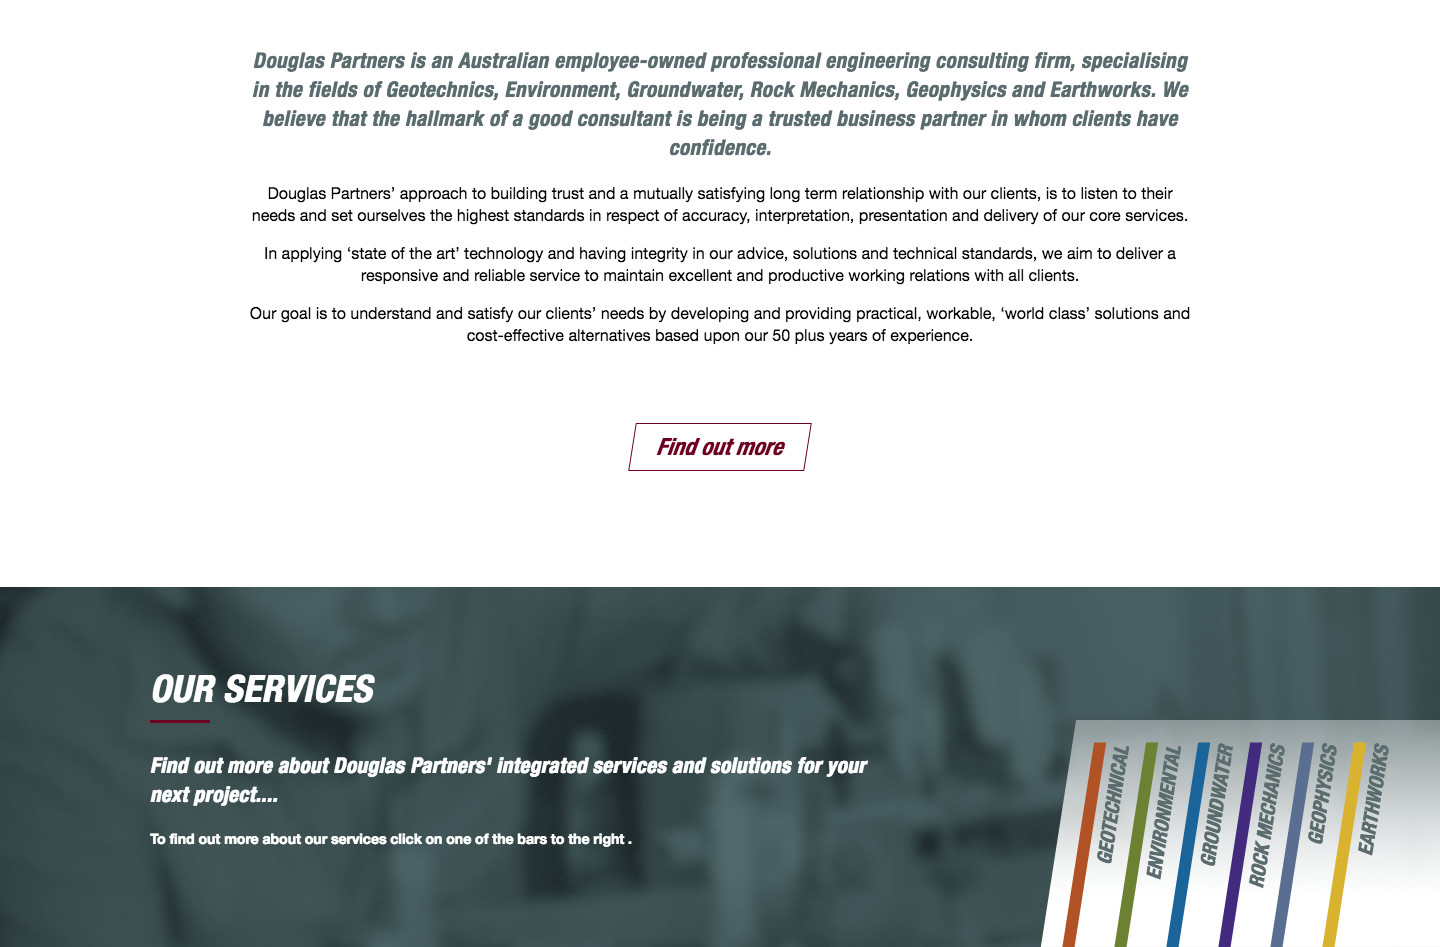 Douglas Partners Website - Services strip and welcome text